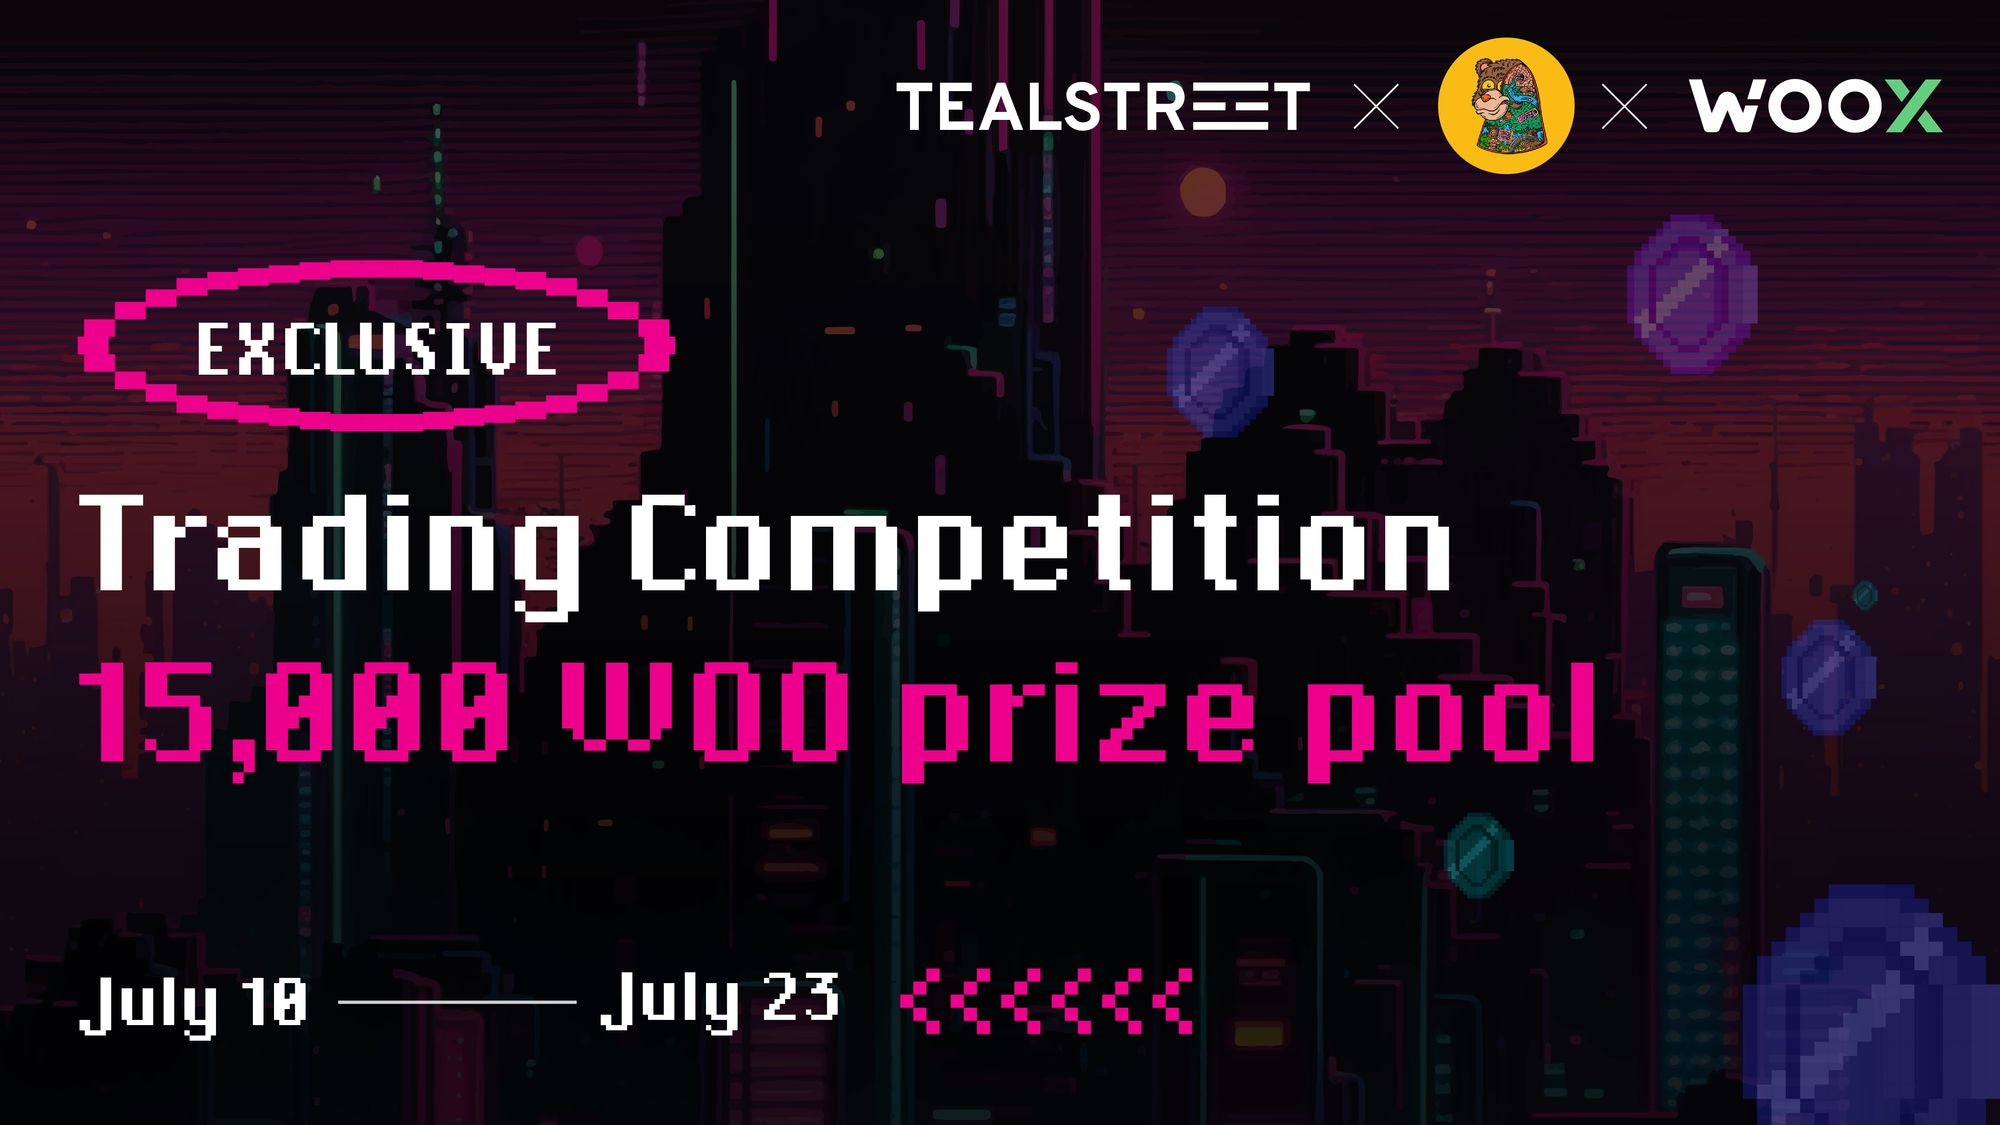 Trading Competition: Tealstreet x PermabearXBT